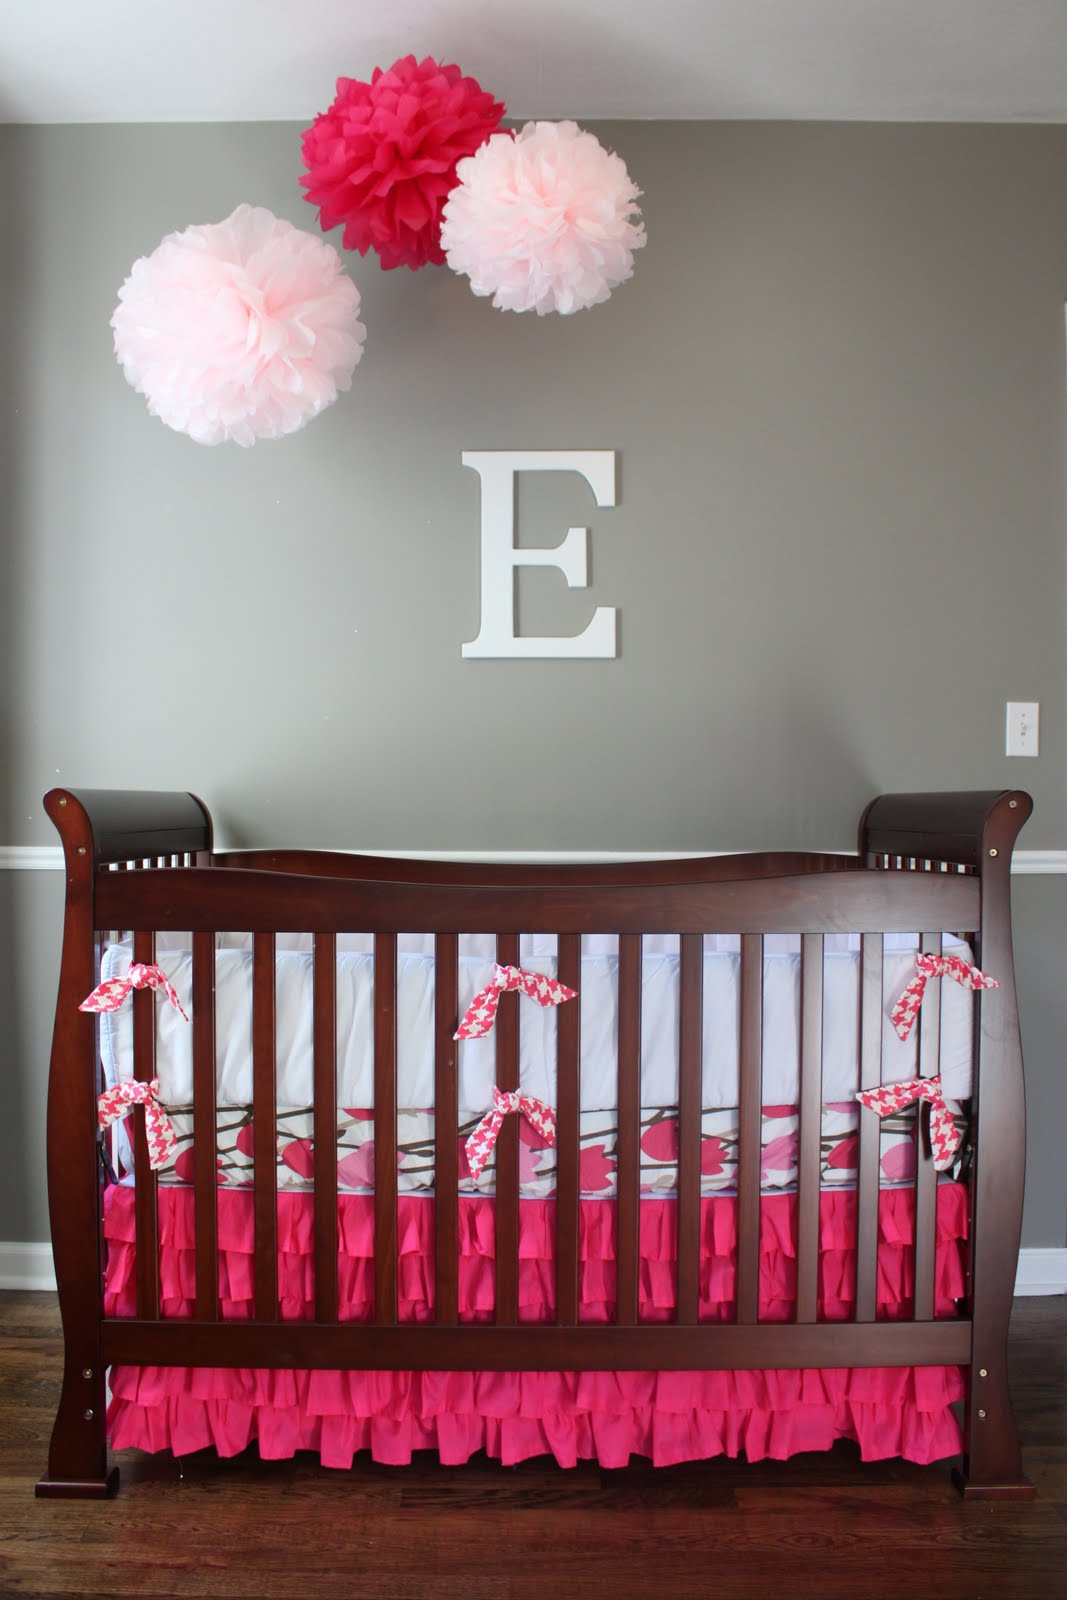 Baby Girl Nursery Decor Ideas
 simple sage designs Check This Out Baby Girl Nursery